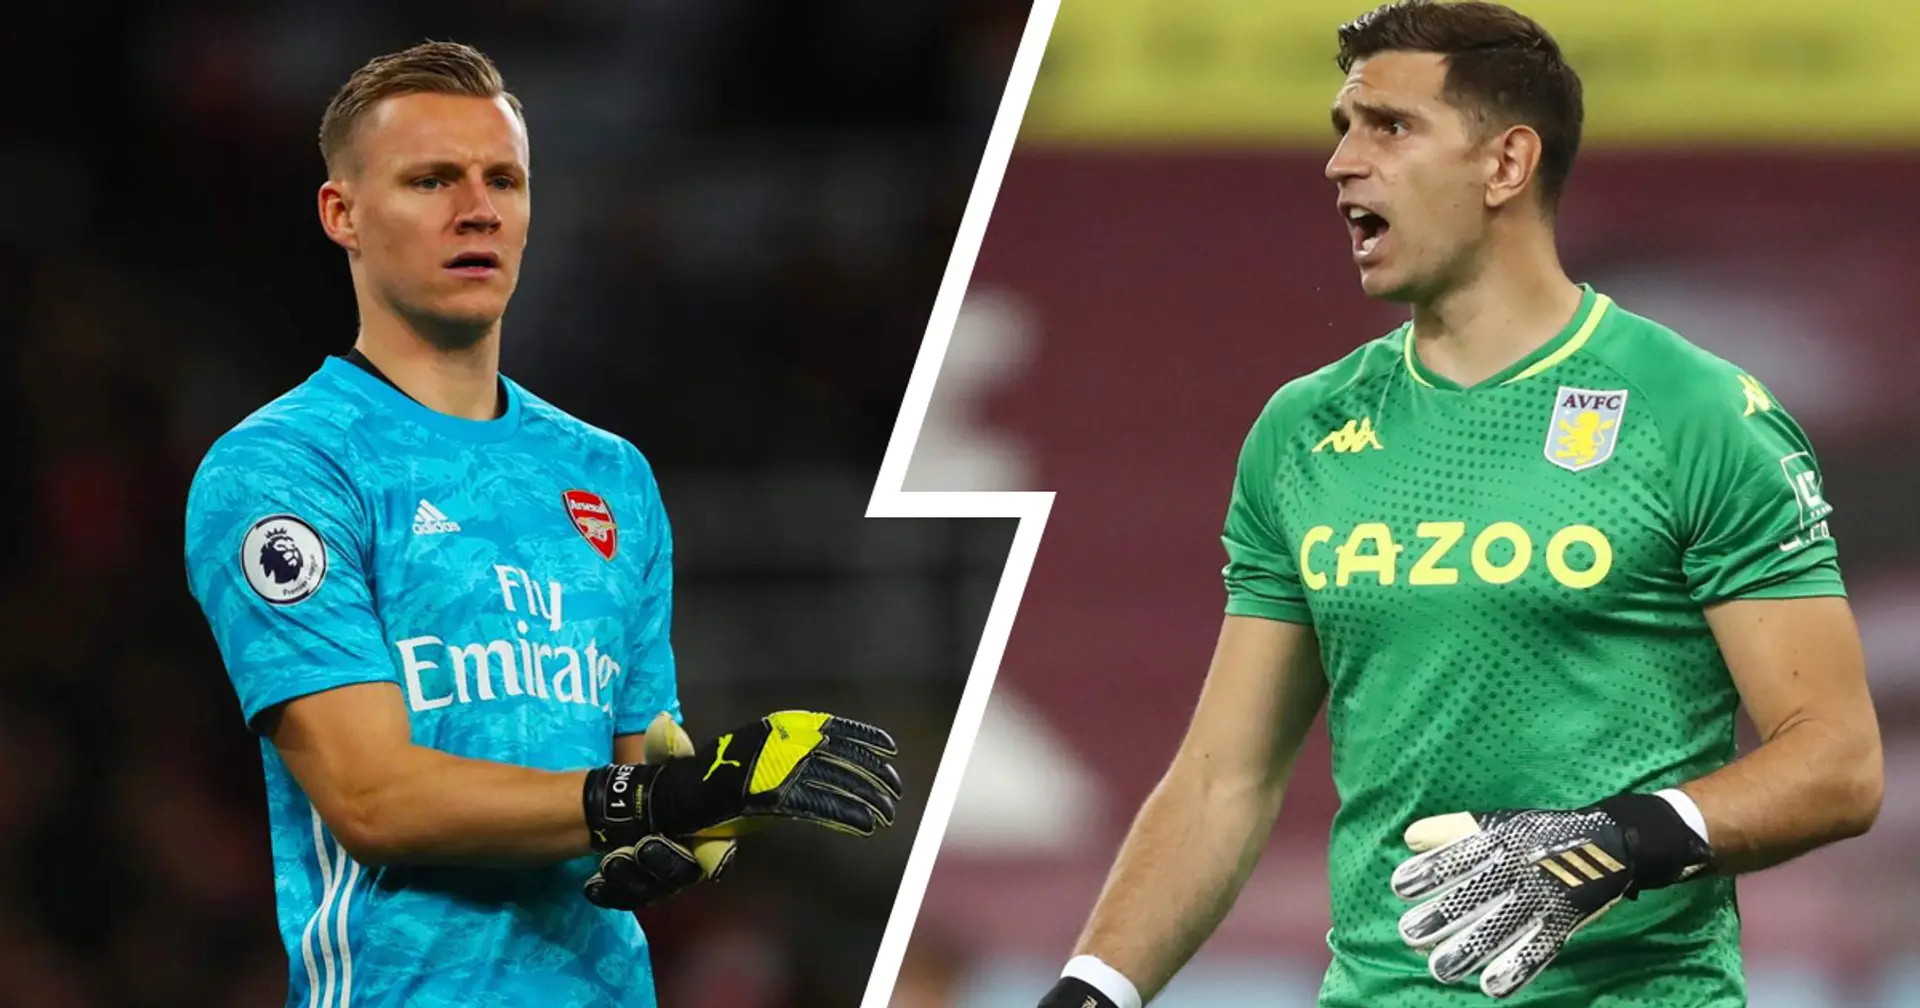 Arsenal are right to back Leno but Martinez's exit still hurts – here's why